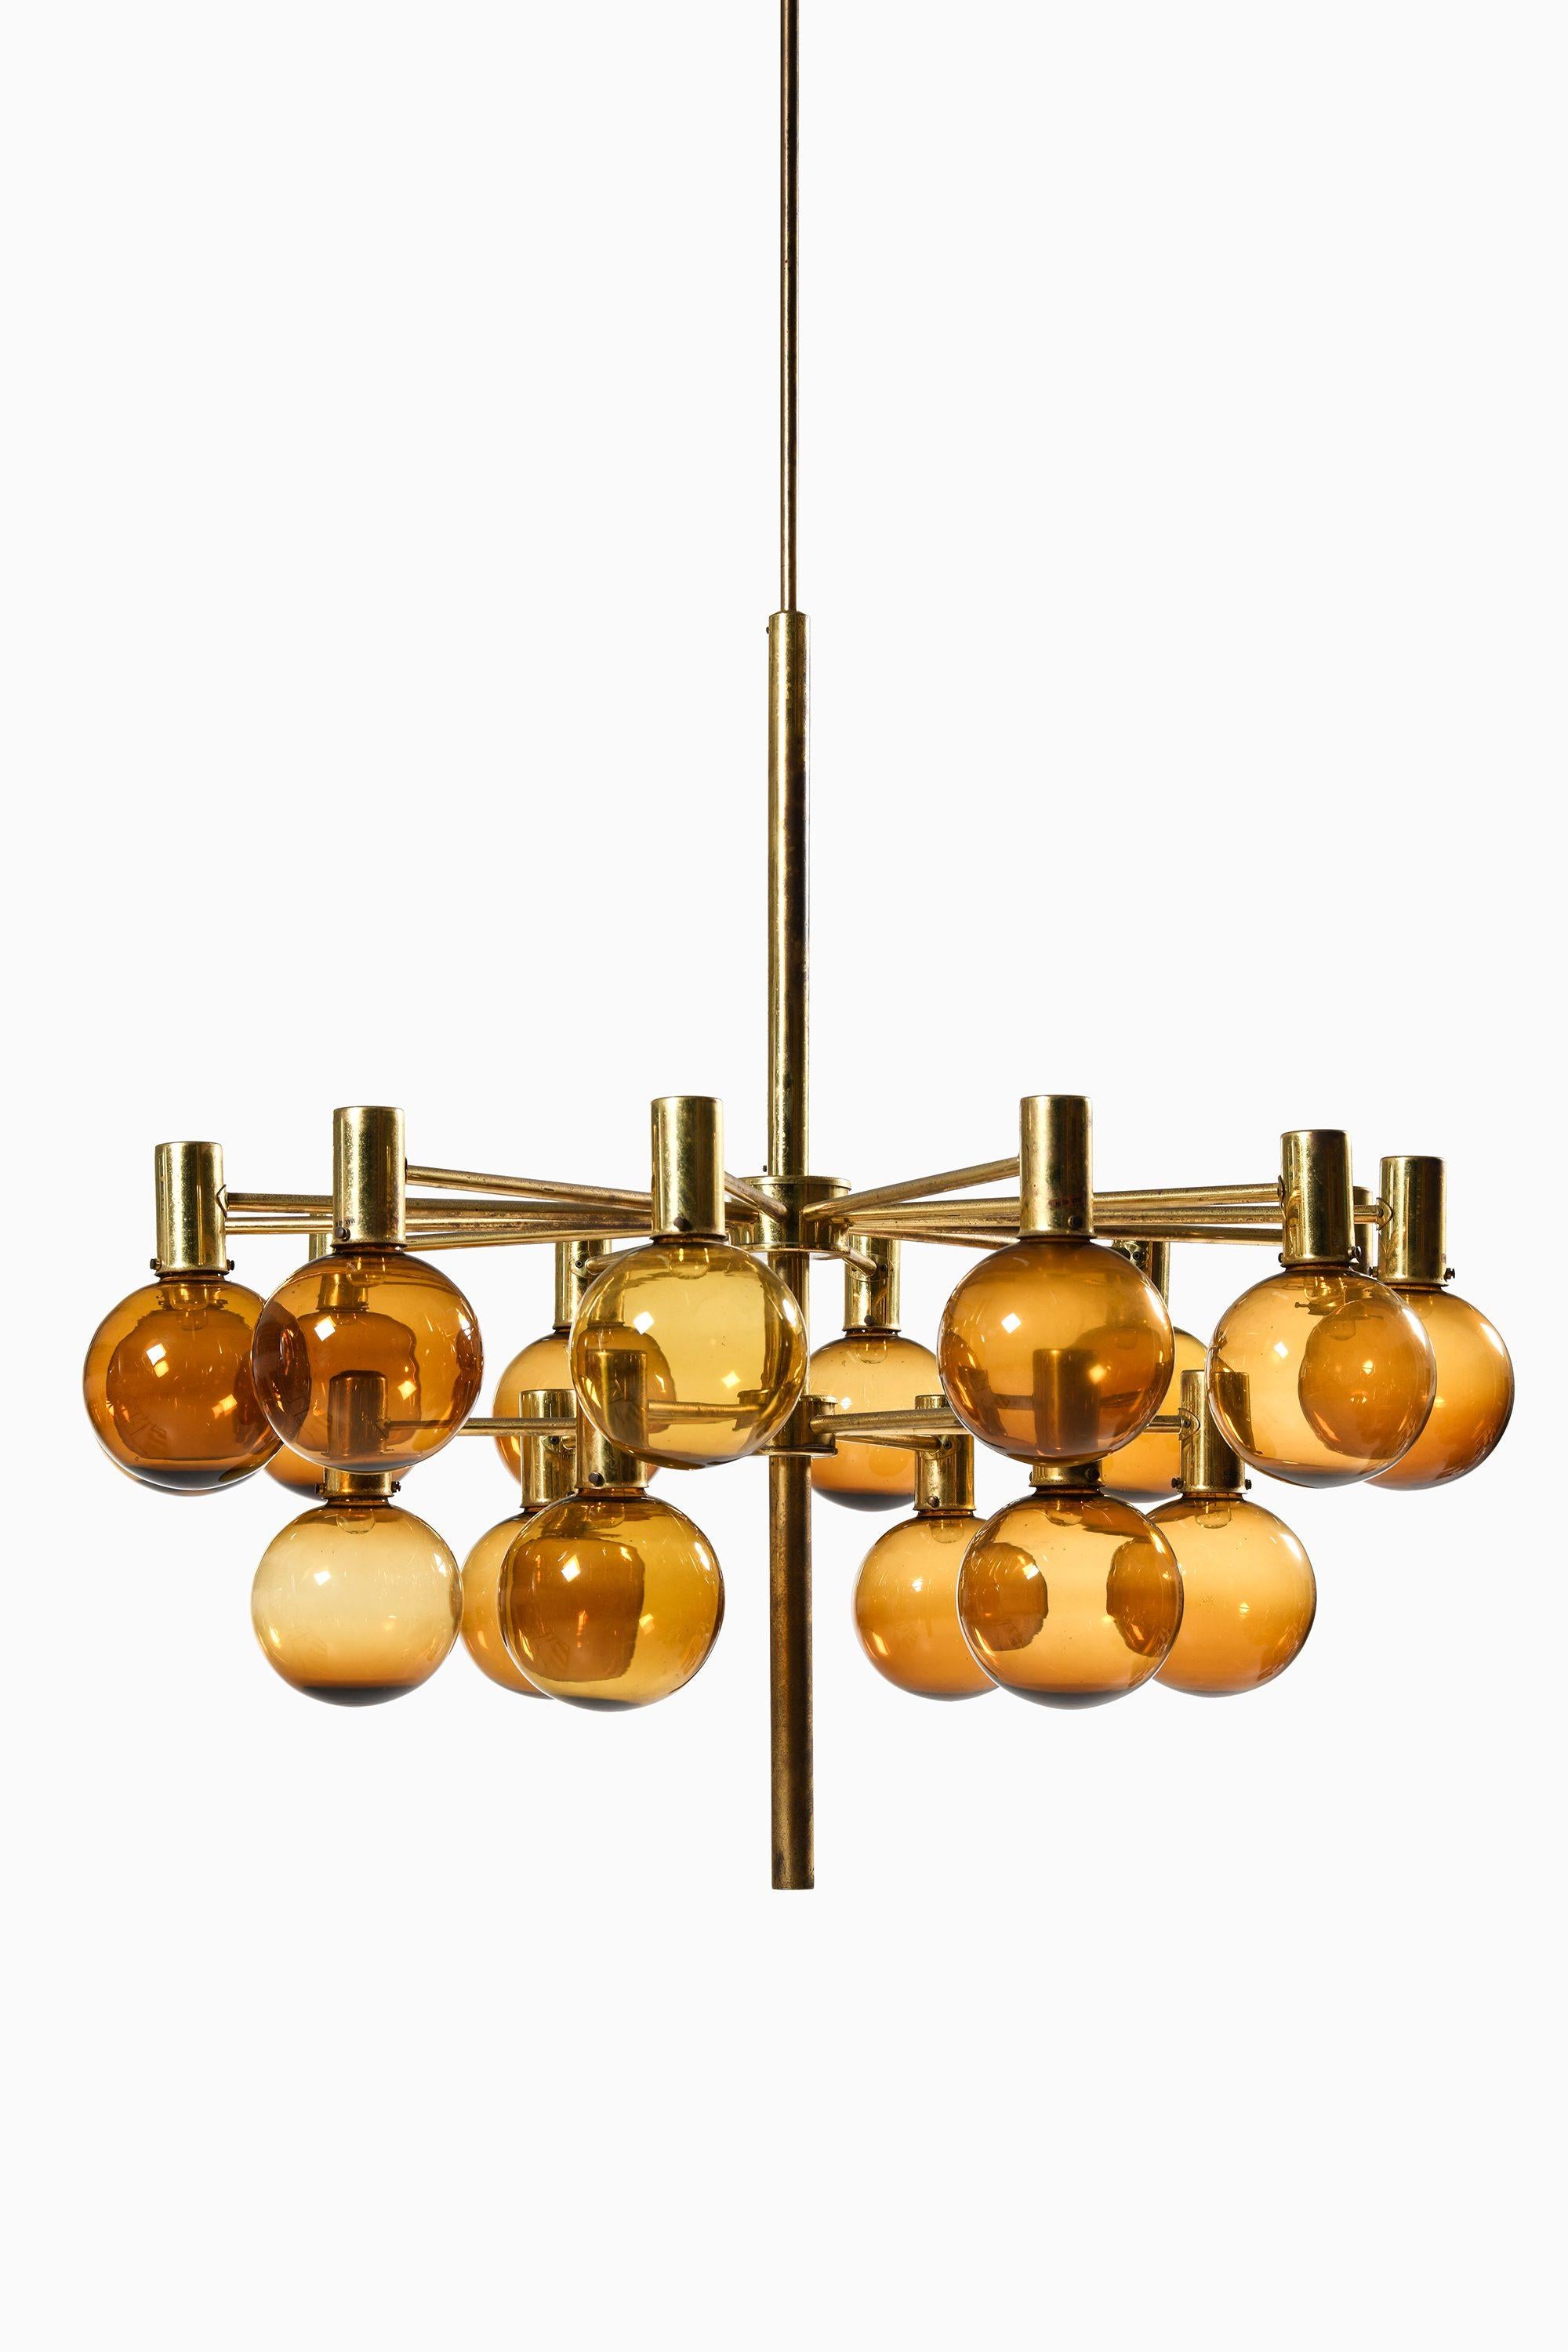 Large Ceiling Lamp in Brass and Amber Glass by Hans-Agne Jakobsson, 1950's

Additional Information:
Material: Brass and amber glass
Style: Mid century, Scandinavian
Produced by Hans-Agne Jakobsson AB in Markaryd, Sweden
Dimensions (W x D x H): 105 x